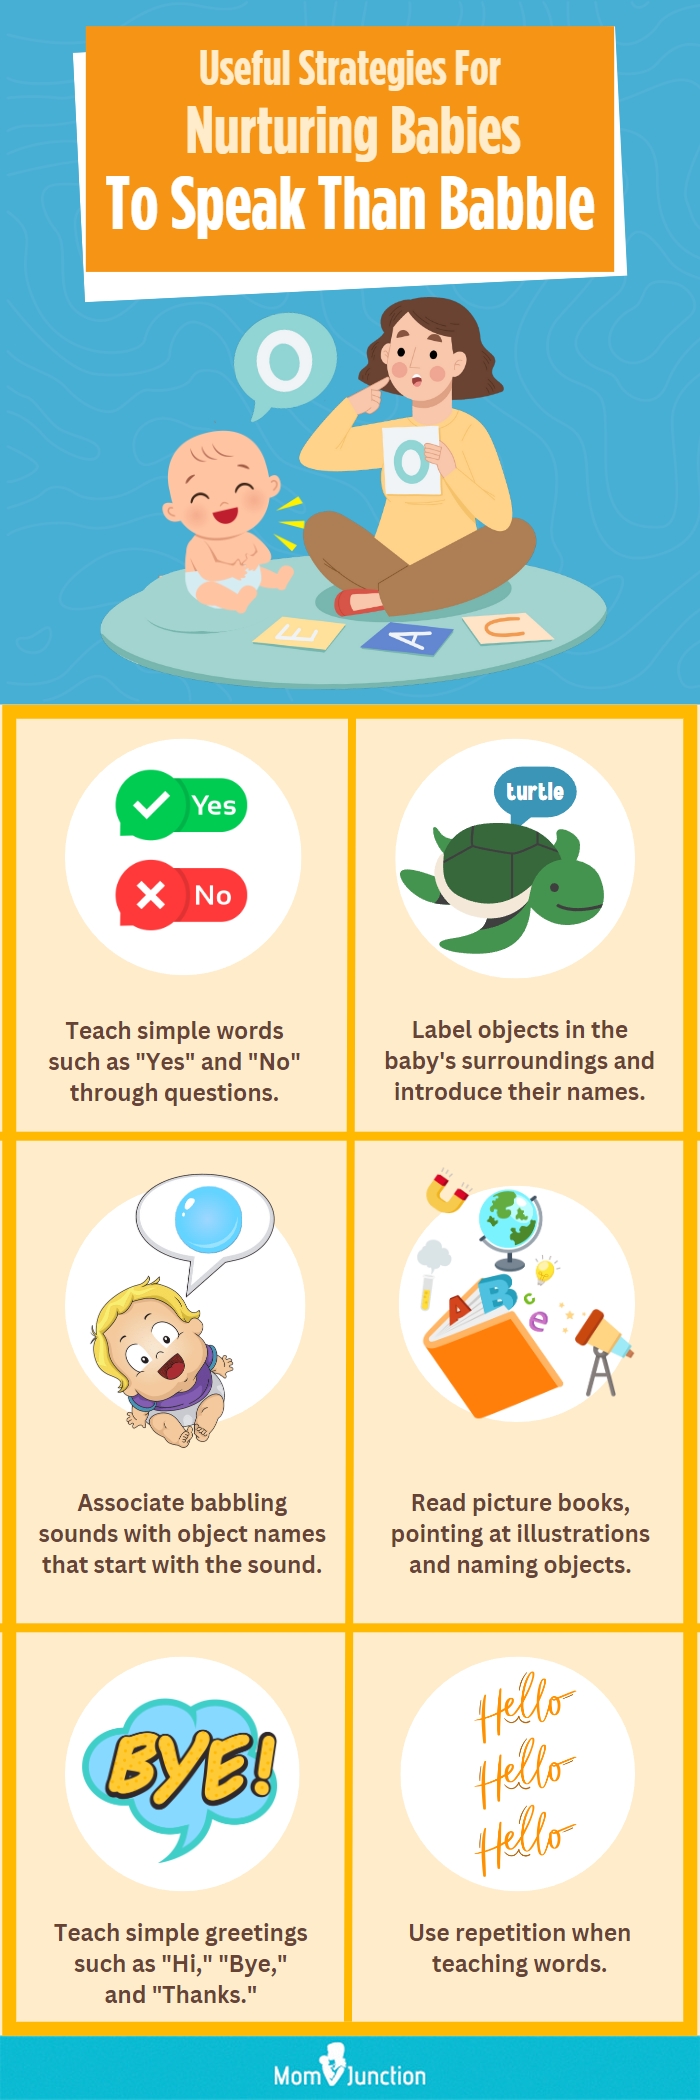 useful strategies for nurturing babies to speak than babble (infographic)